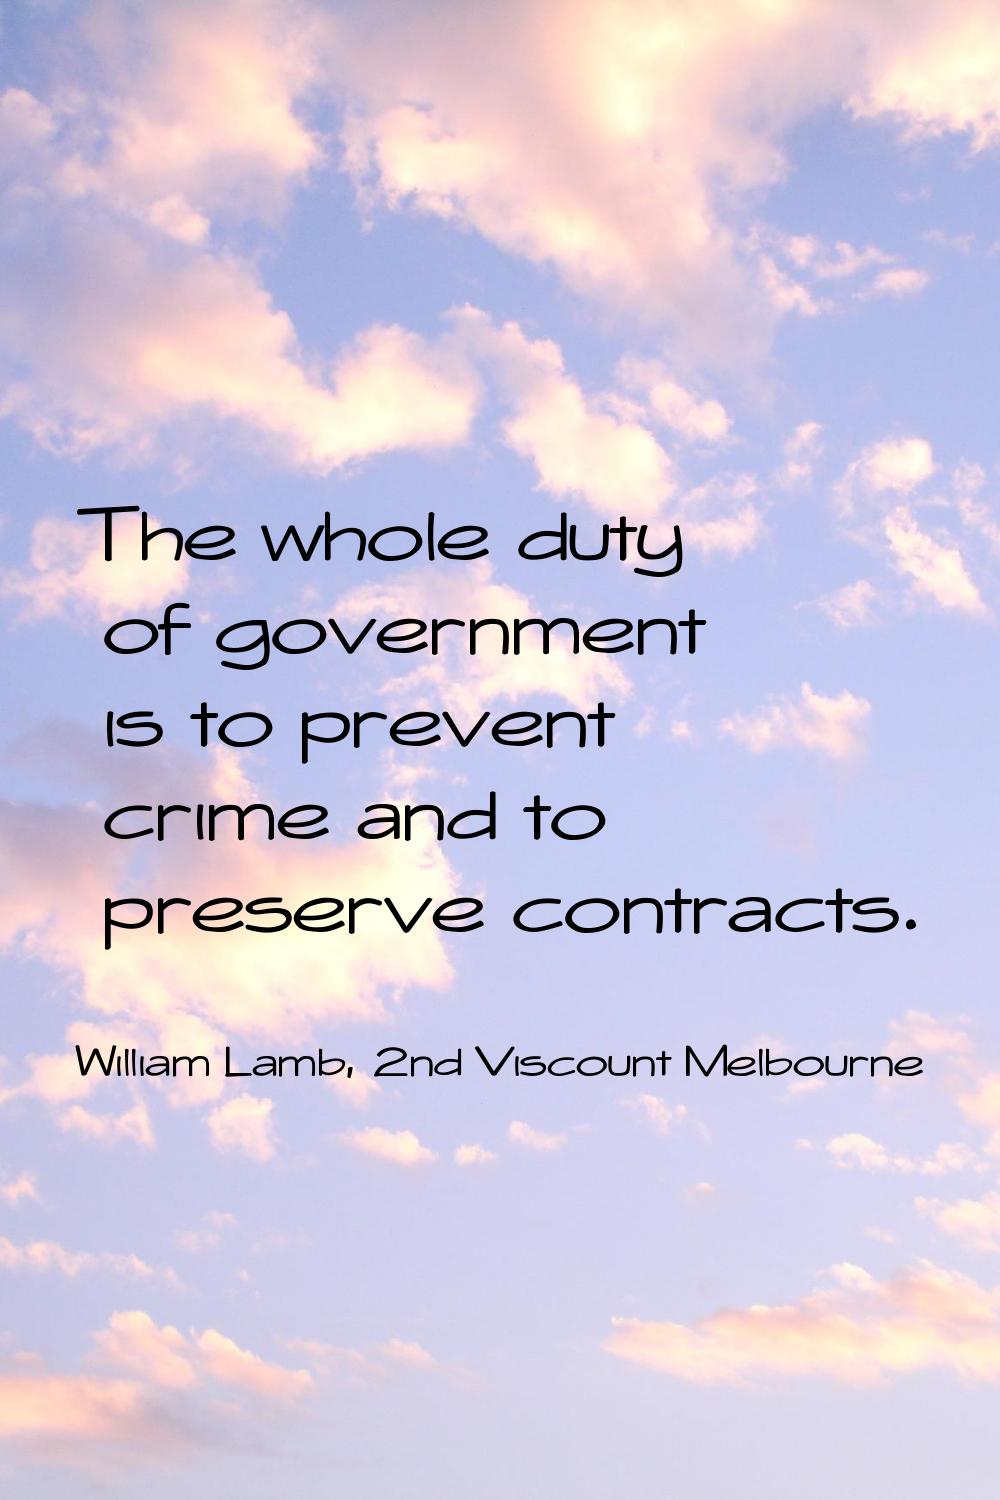 The whole duty of government is to prevent crime and to preserve contracts.